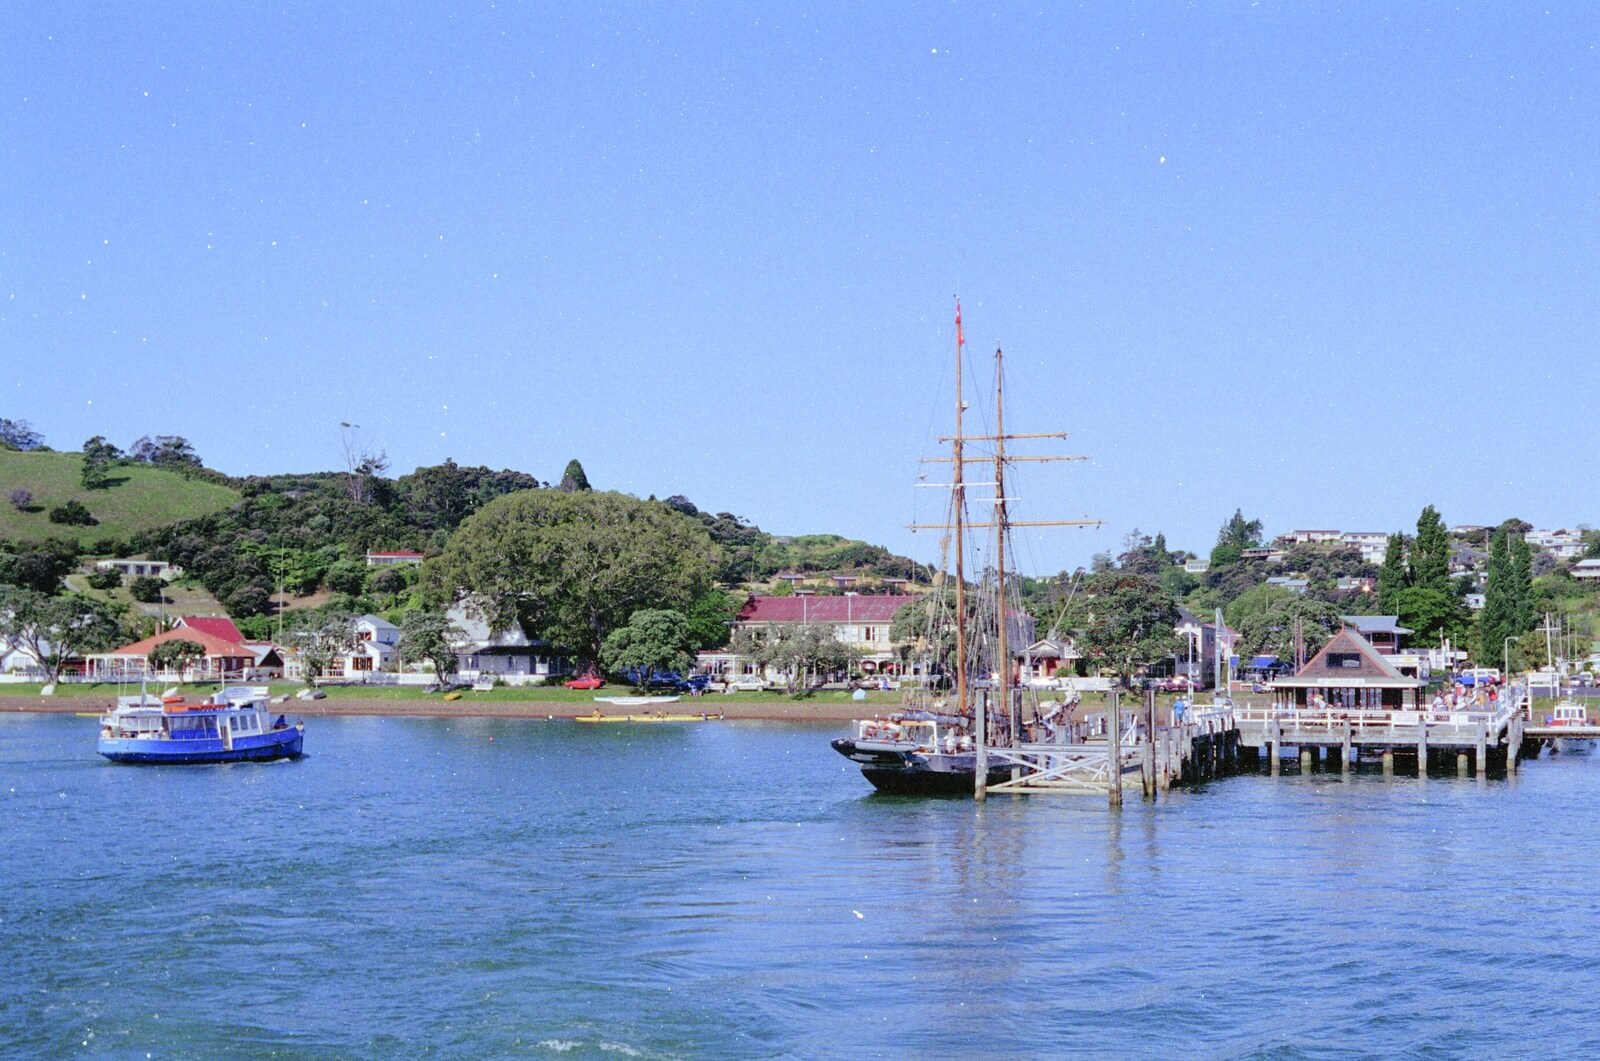 A tall ship from The Bay Of Islands, New Zealand - 29th November 1992